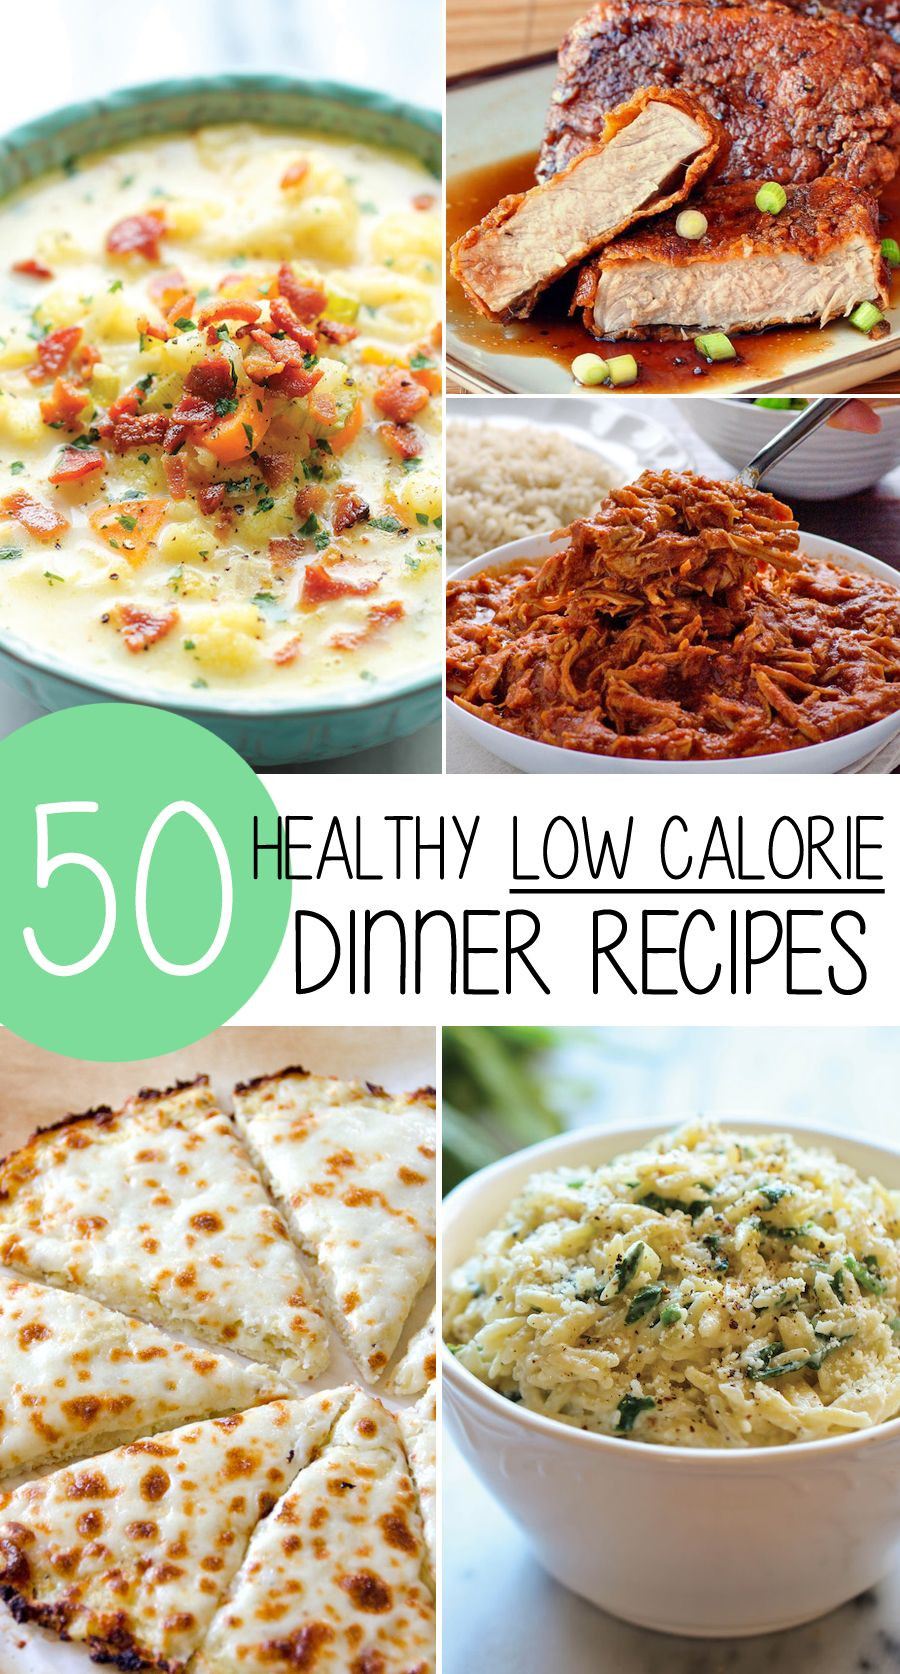 Low Calorie Recipes For Two
 50 Healthy Low Calorie Weight Loss Dinner Recipes